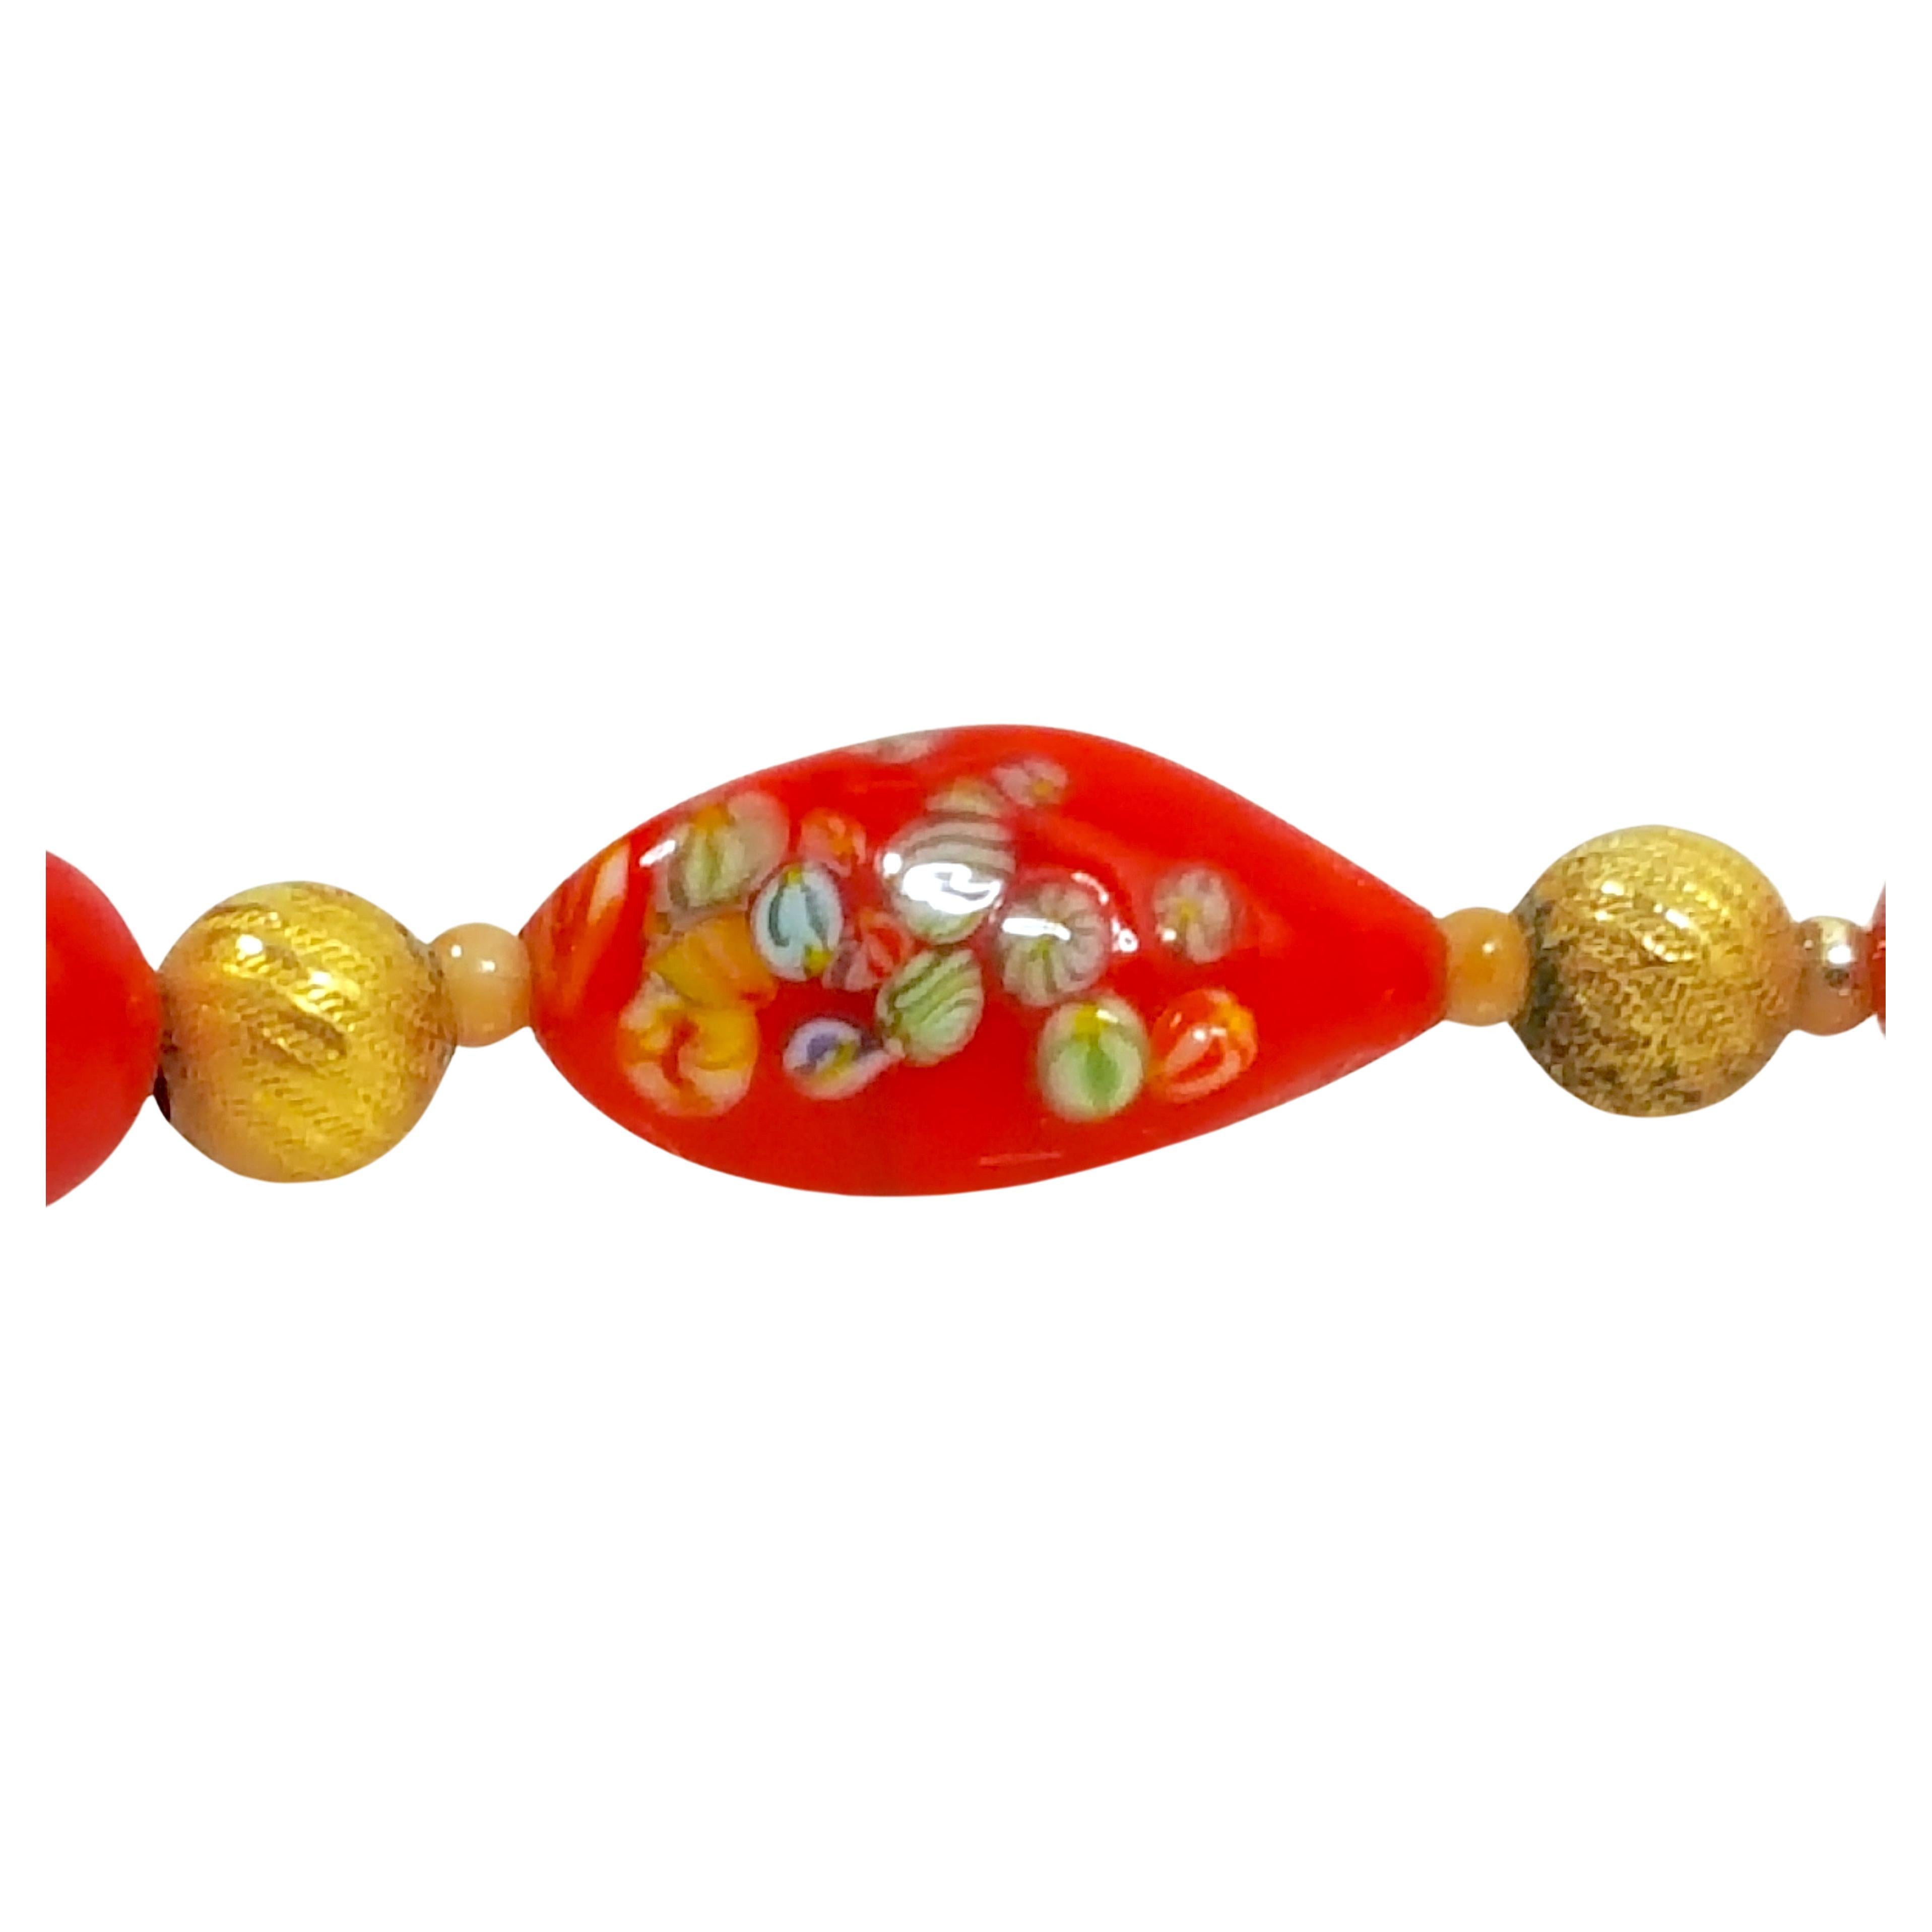 This antique late-Victorian Italian Murano-glass unsigned necklace features three oblong red beads with miniature multicolor swirled-stripe patterns made with the millefiori technique, along with rounds beads that include yellow-gold gilt brass